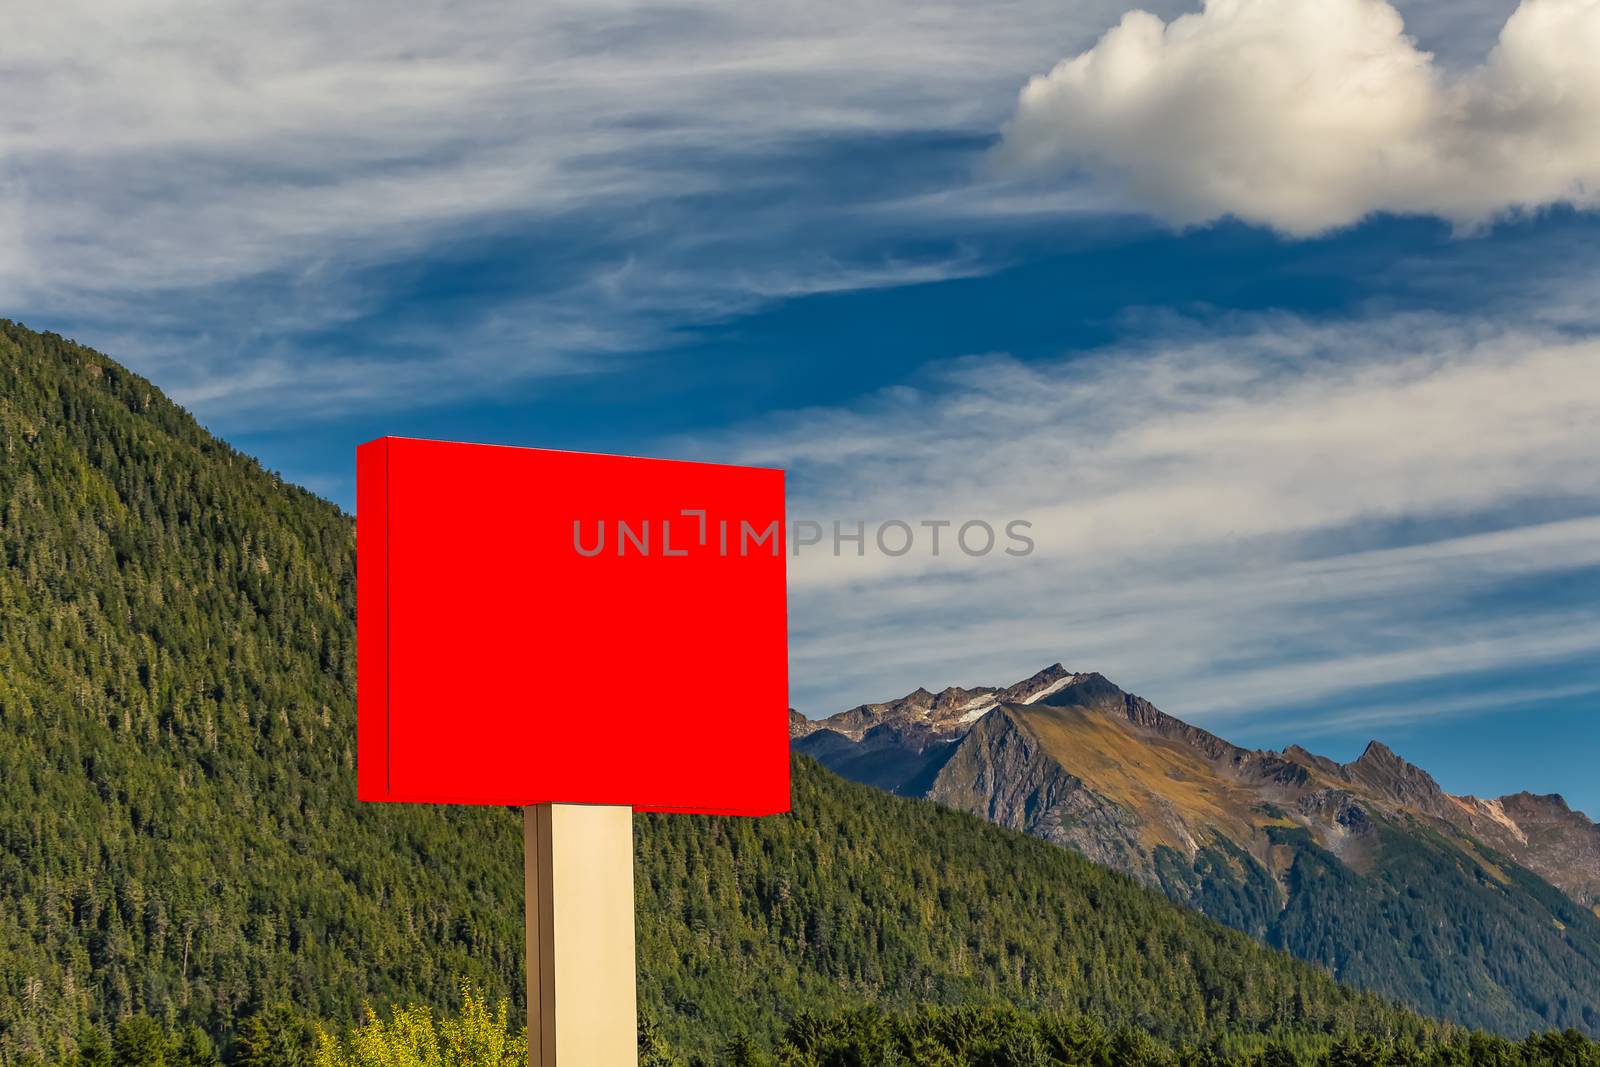 Blank red sign in the foreground and forest, mountains, blue sky with clouds in the background